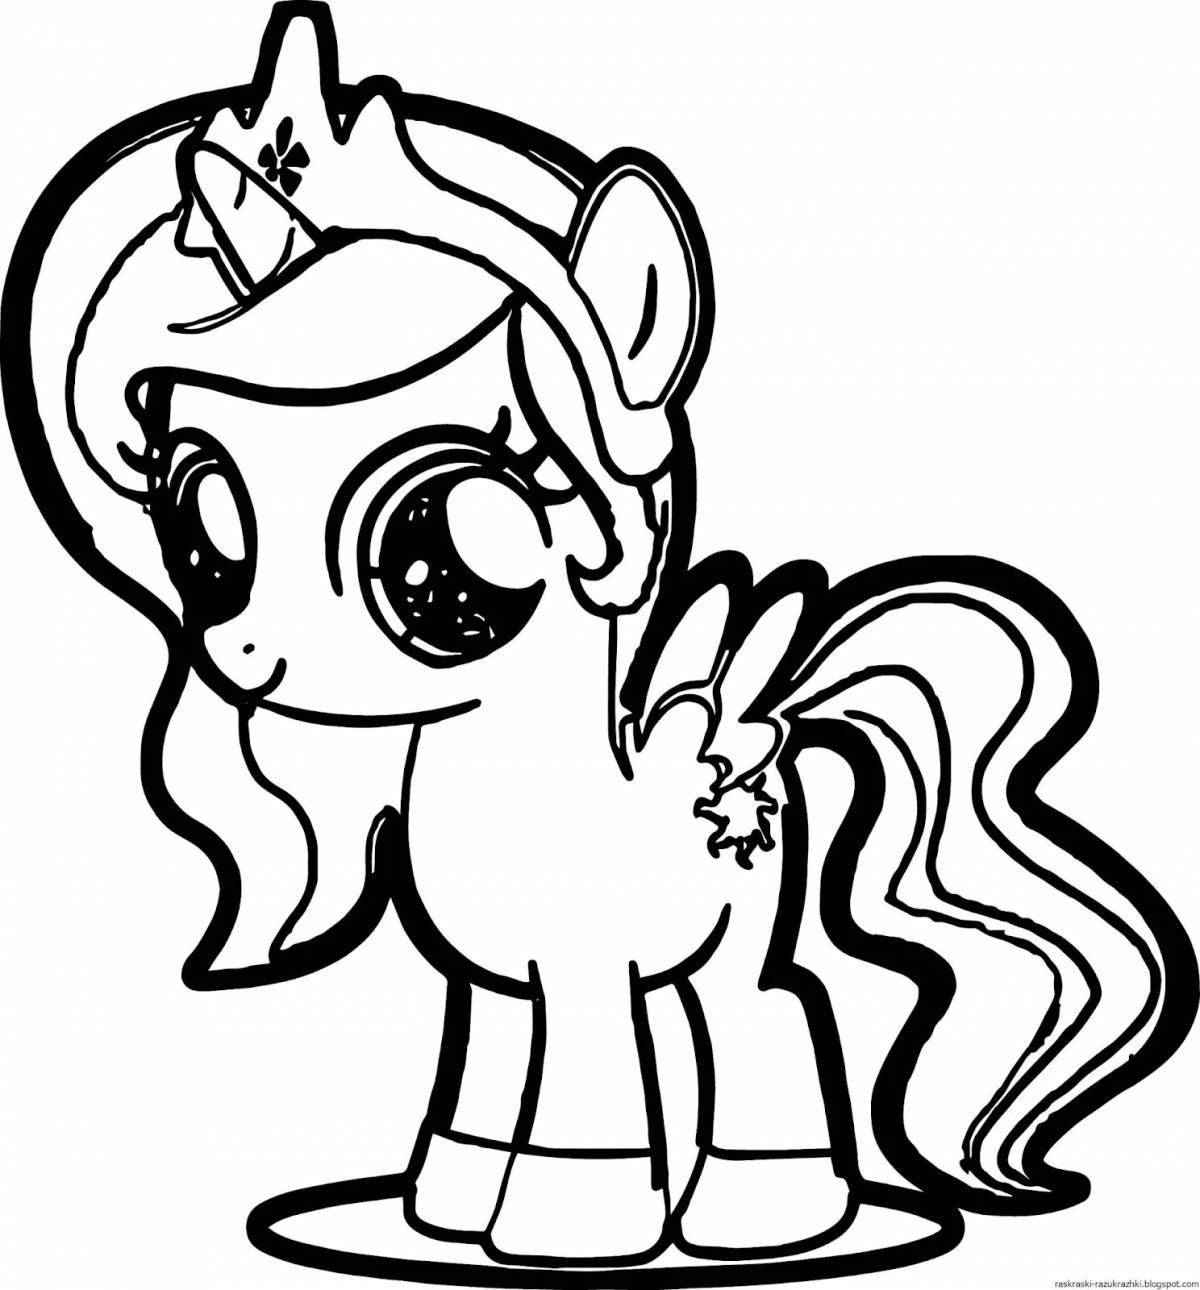 Exquisite pony cuties coloring book for girls